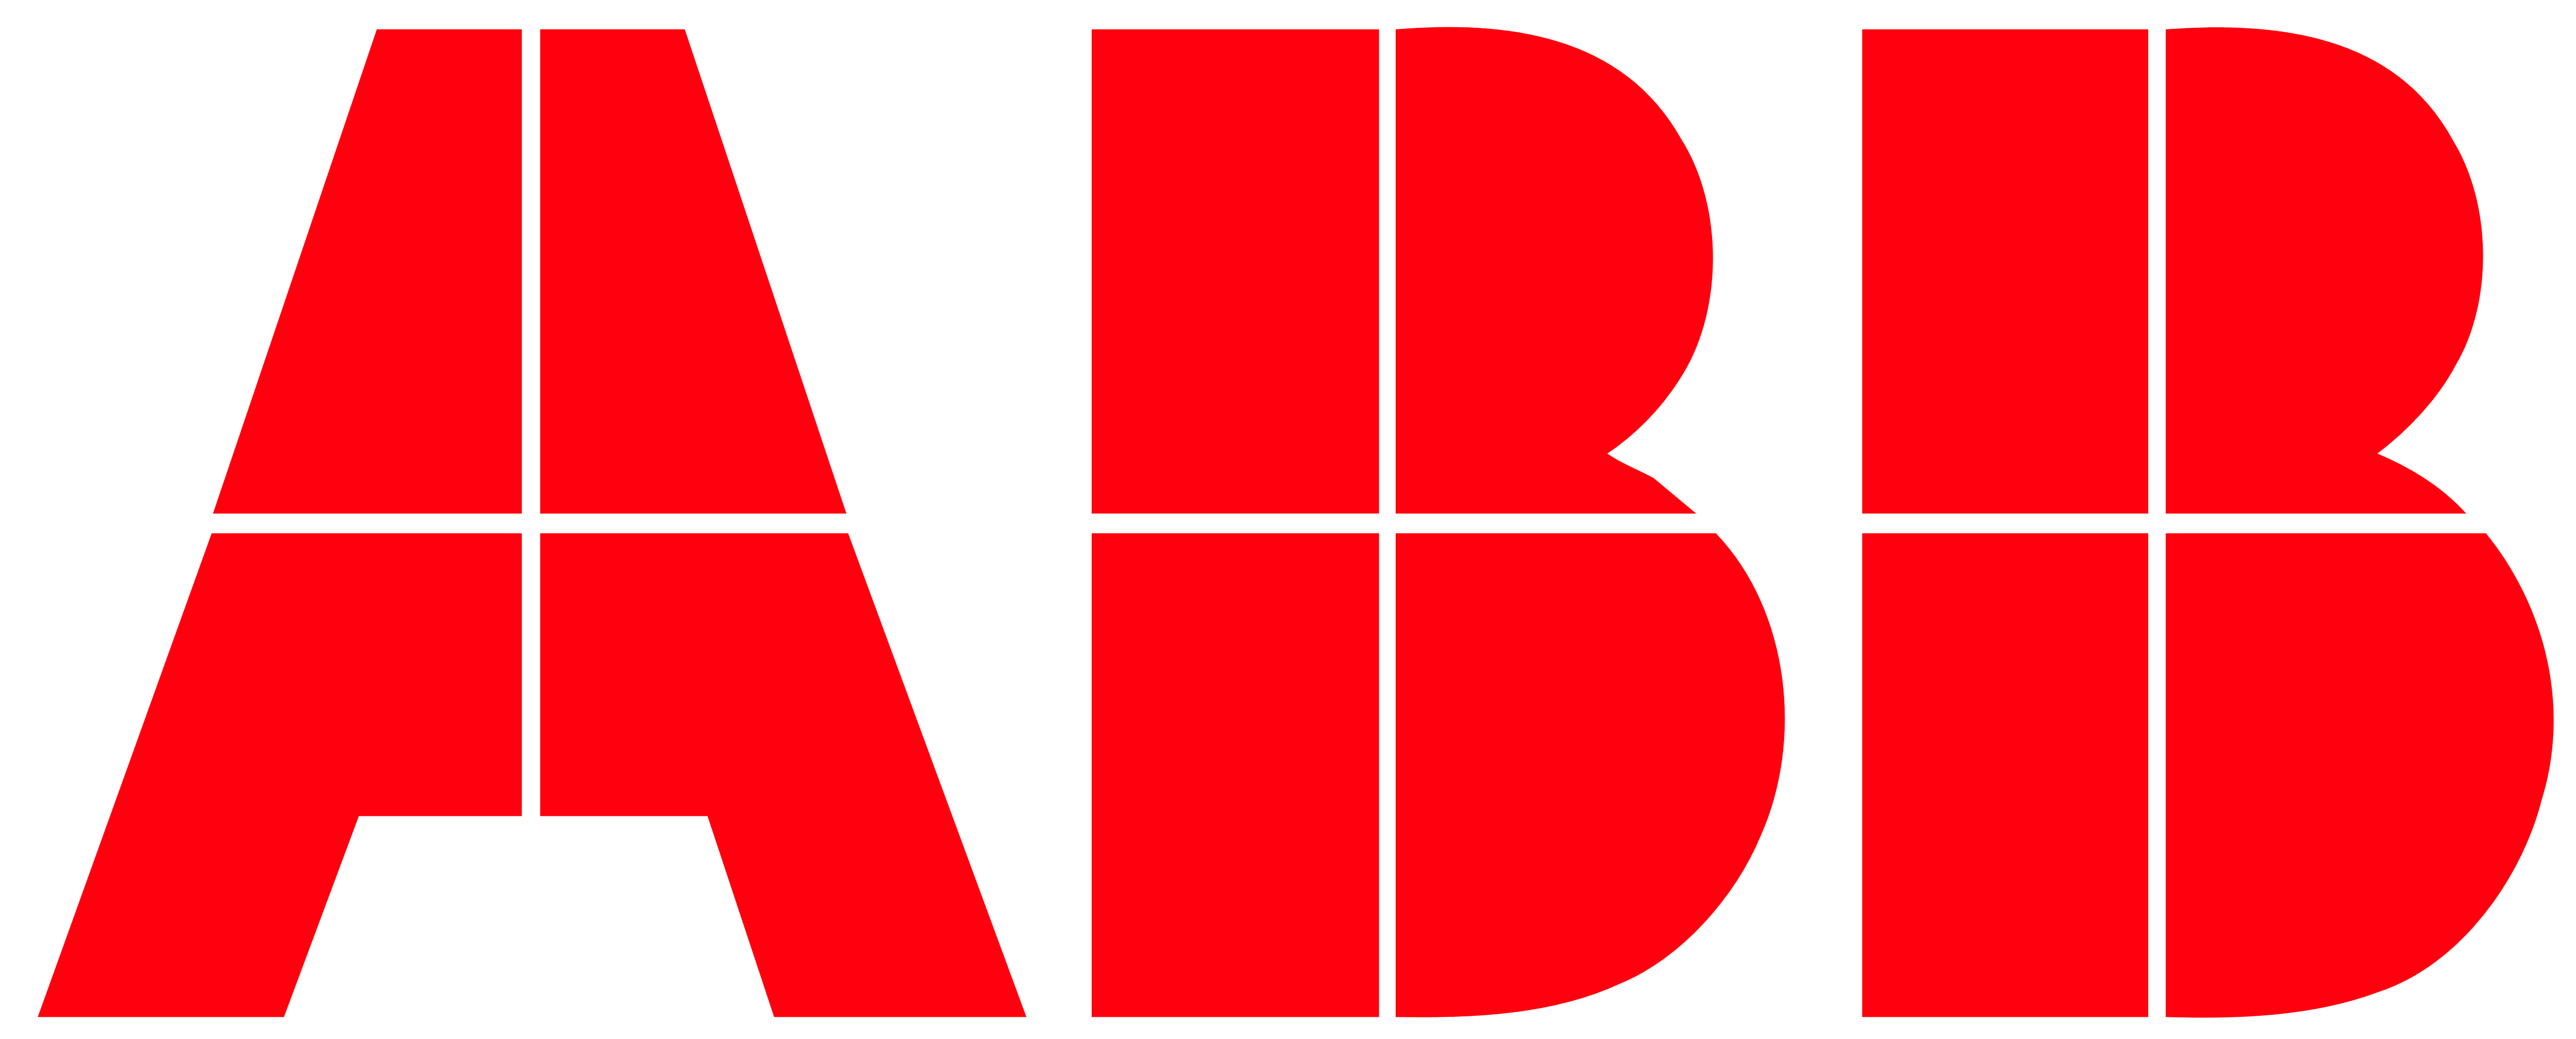 Markus Bachmann, Global Lean Process Manager (Vice President) at ABB